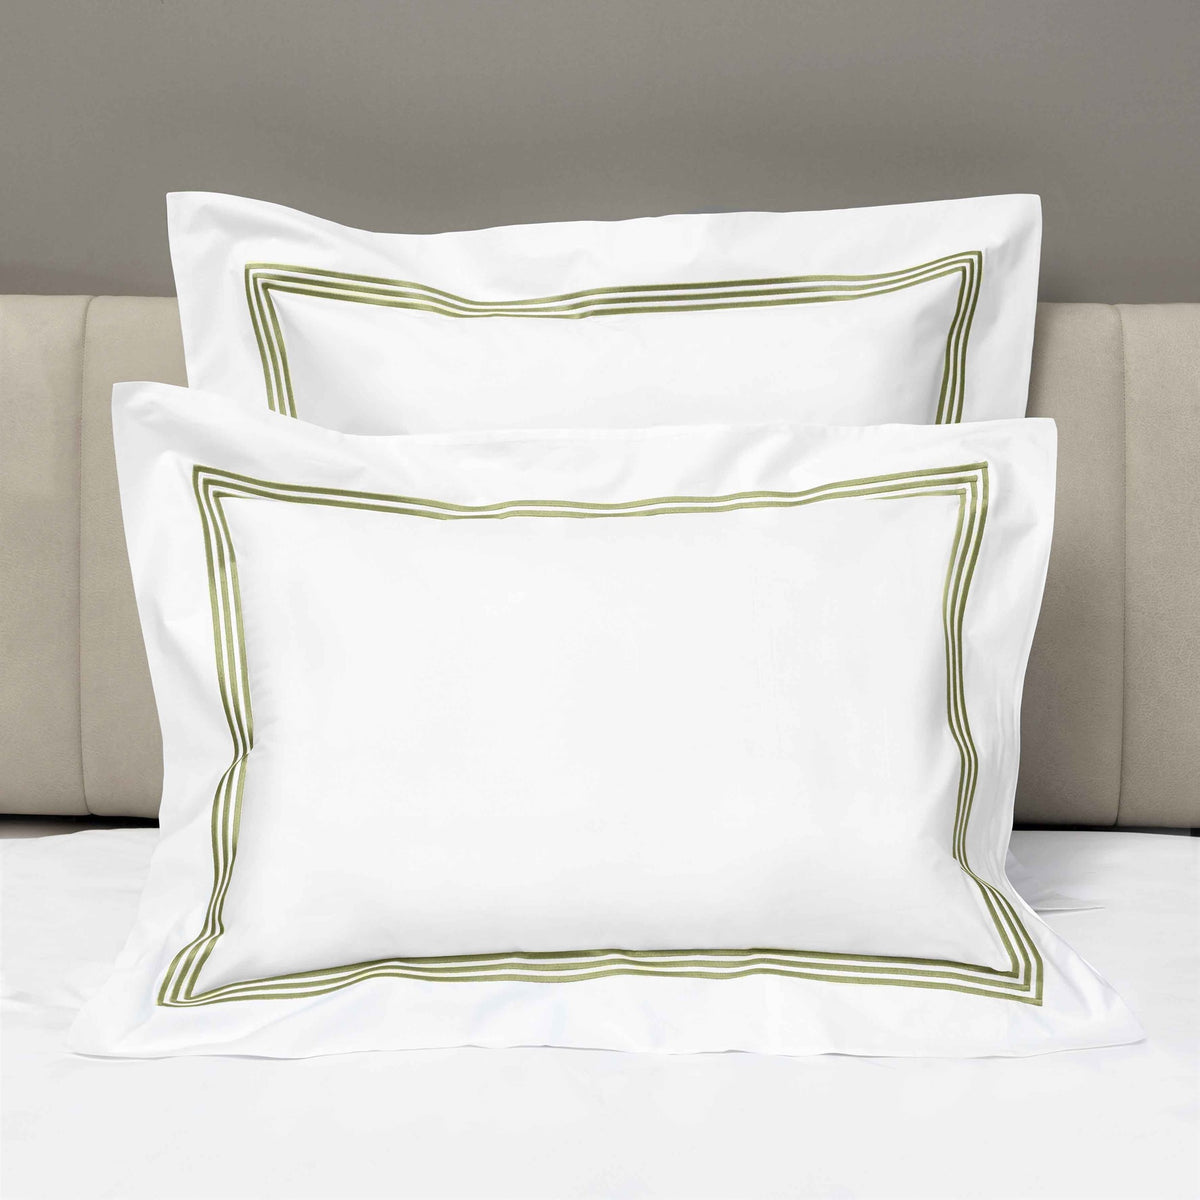 Shams of Signoria Platinum Percale Bedding in White/Moss Green Color